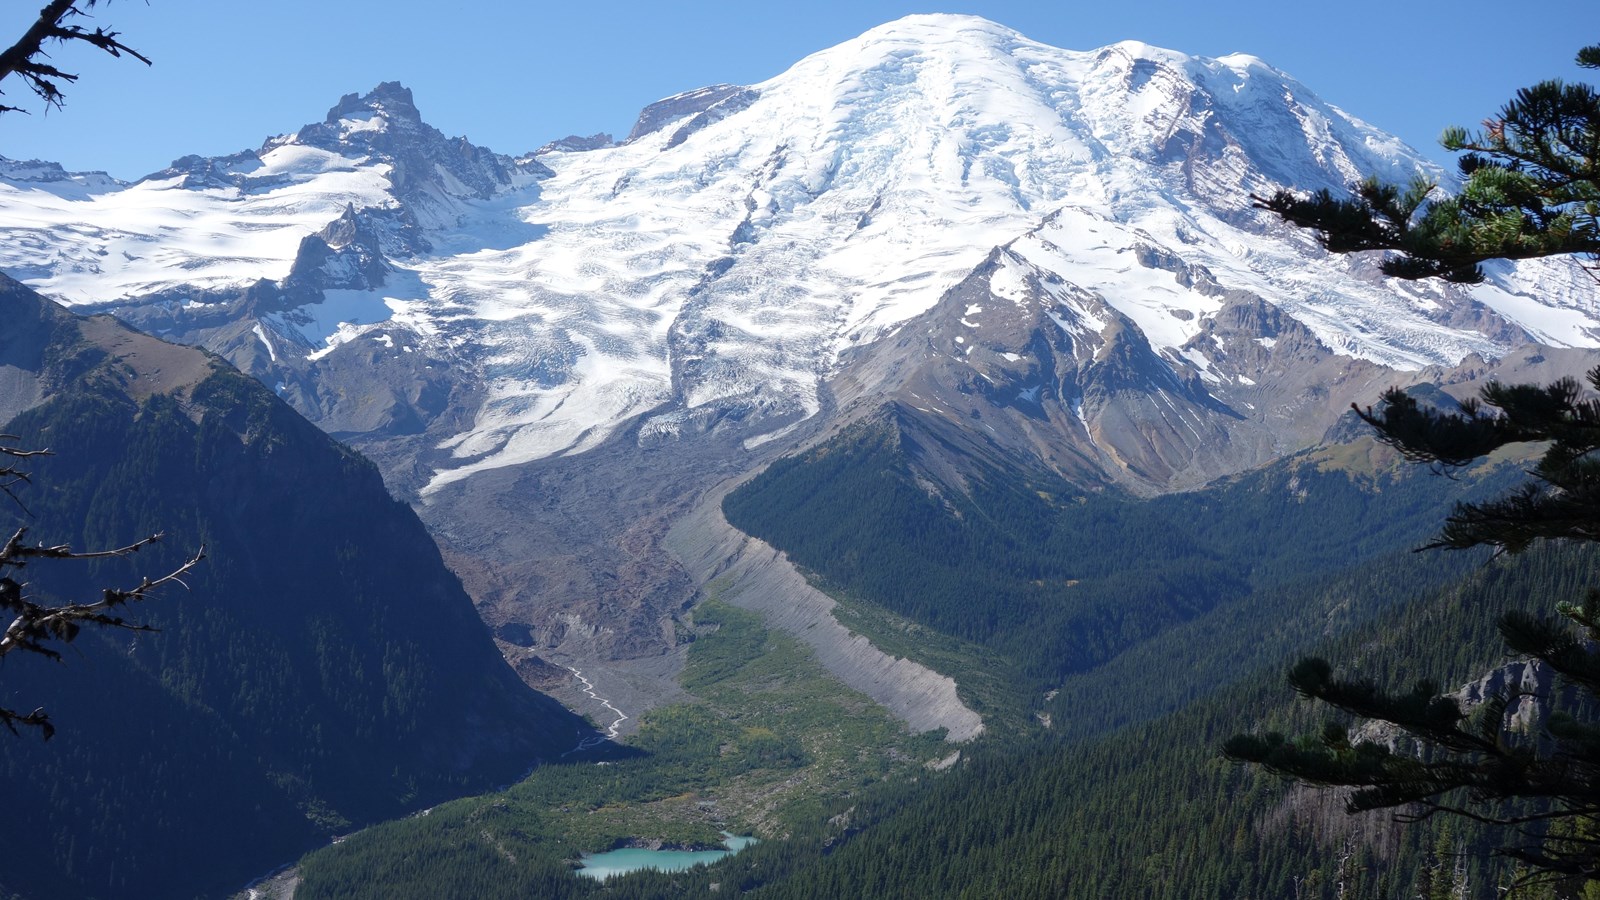 A mountain peaked covered in a large glacier descending into a forested valley.